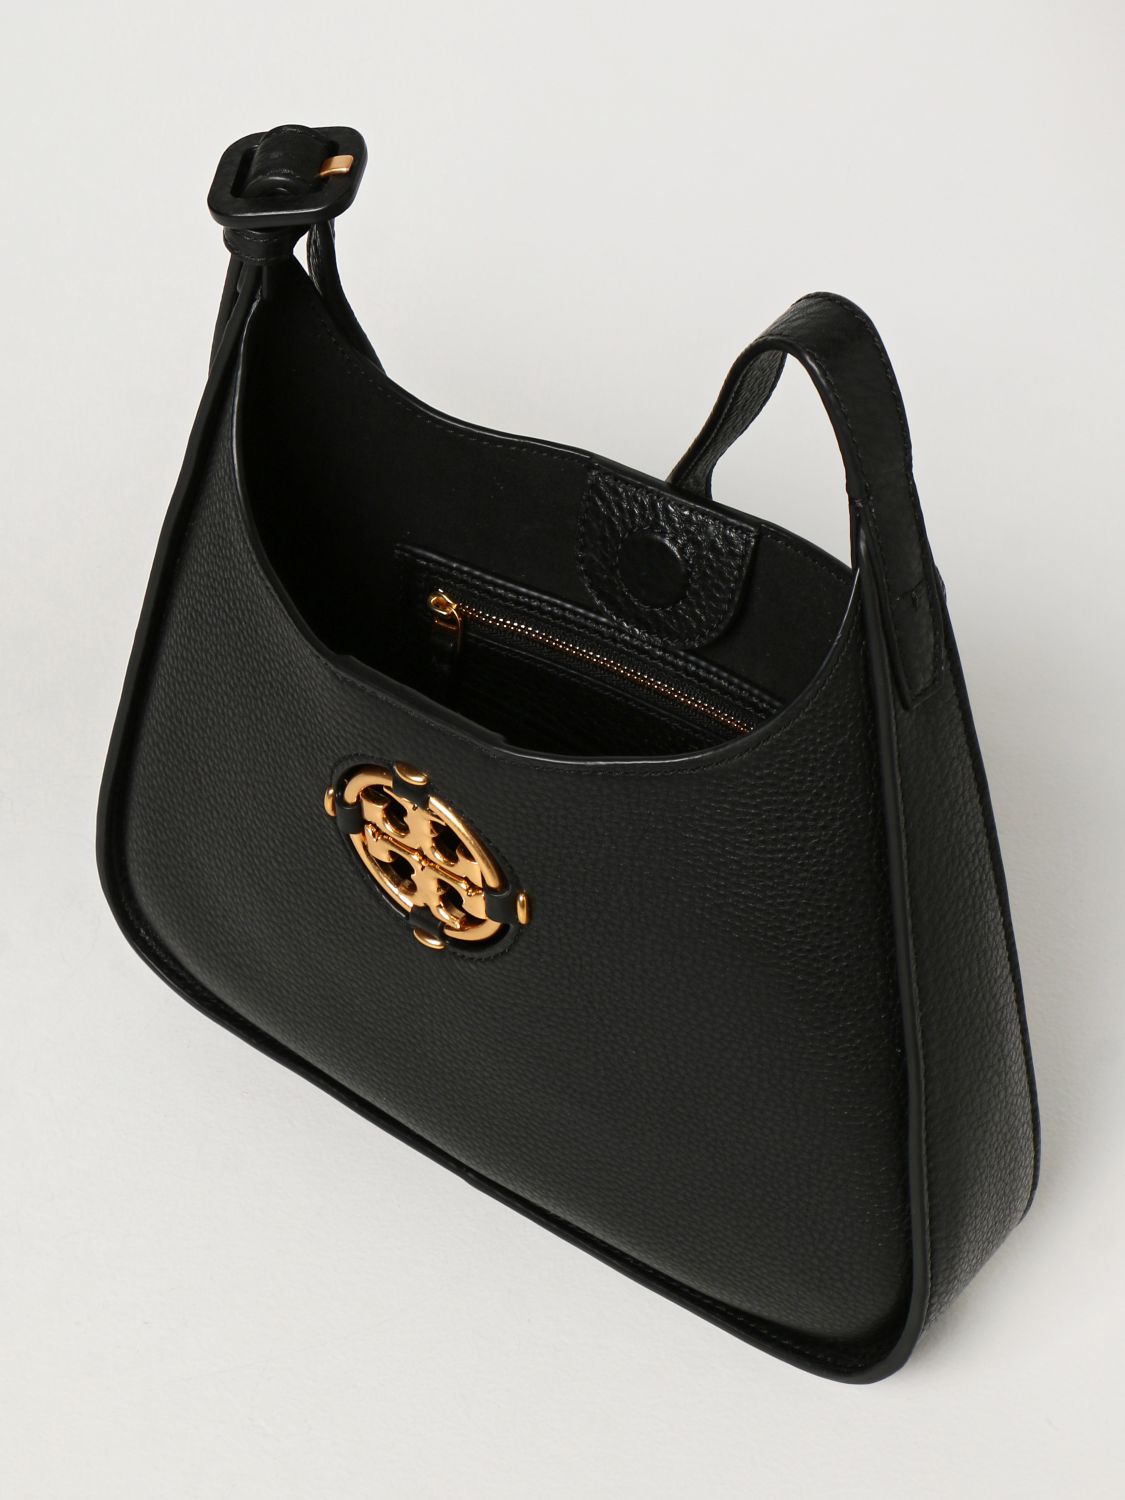 TORY BURCH: Miller bag in grained leather with emblem - Black | Tory Burch  crossbody bags 82982 online on 